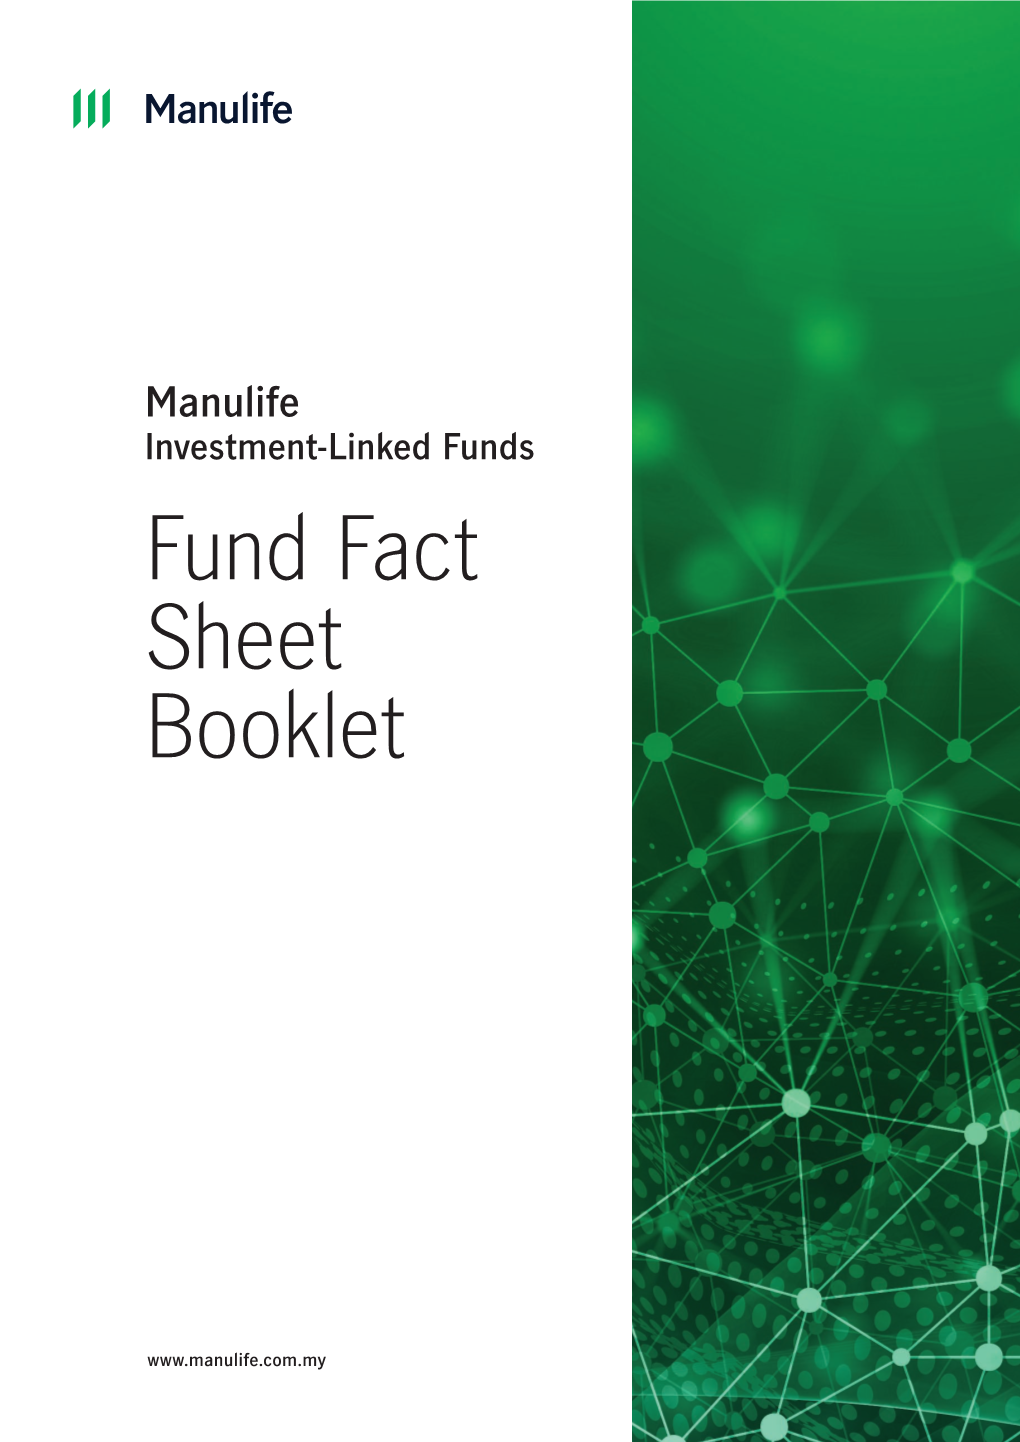 Fund Fact Sheet Booklet